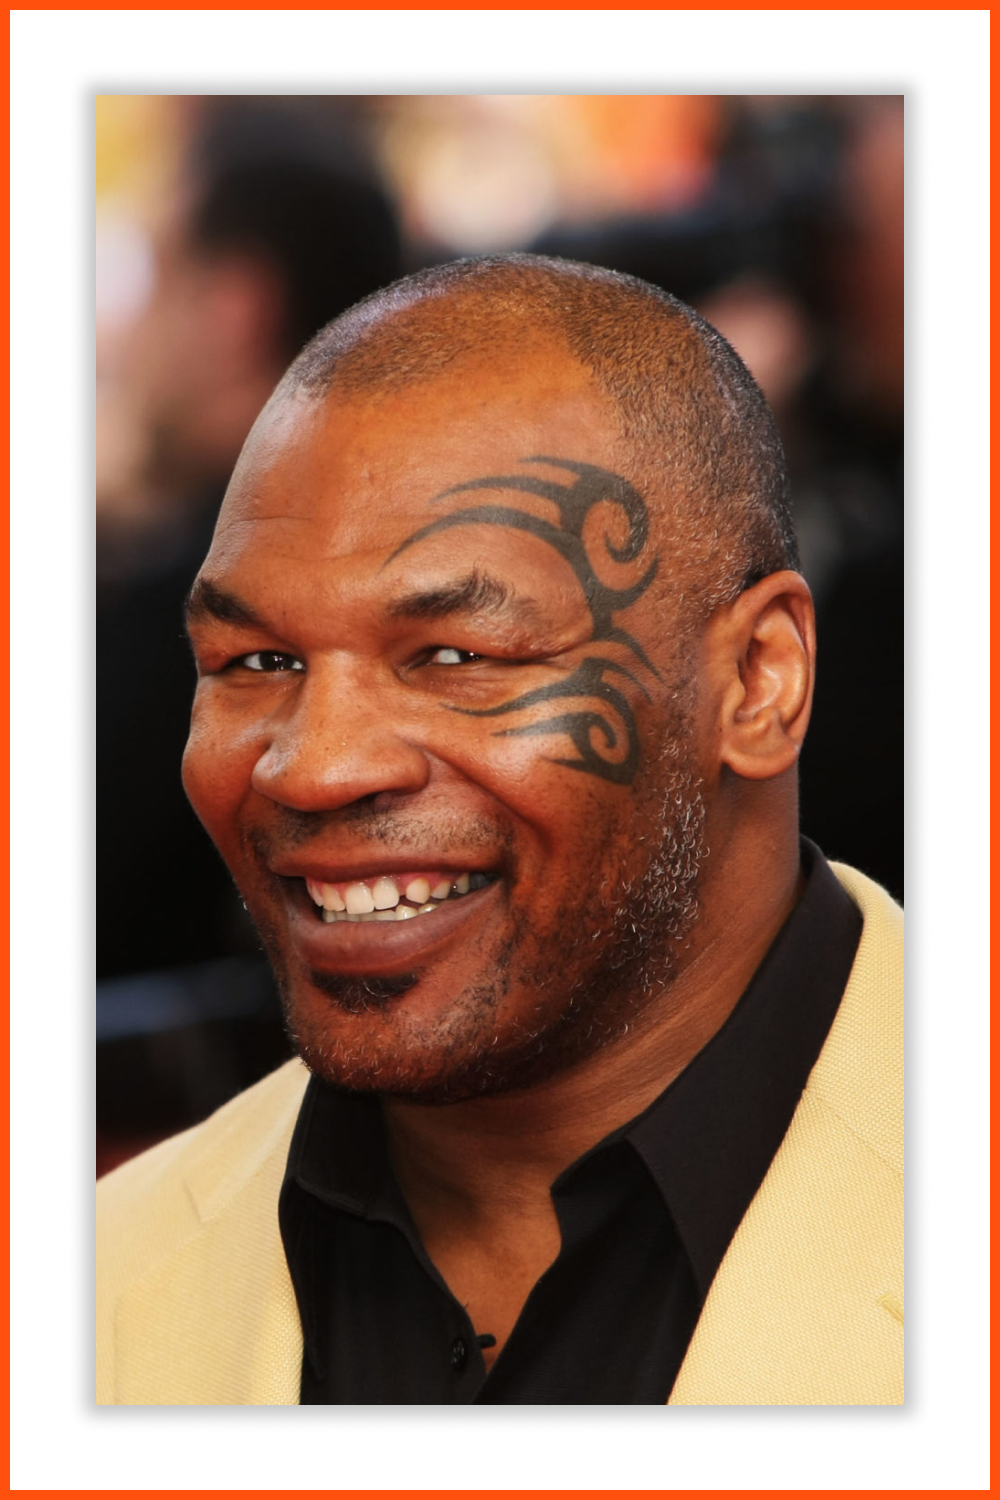 Mike Tyson's face with his famous tattoo.